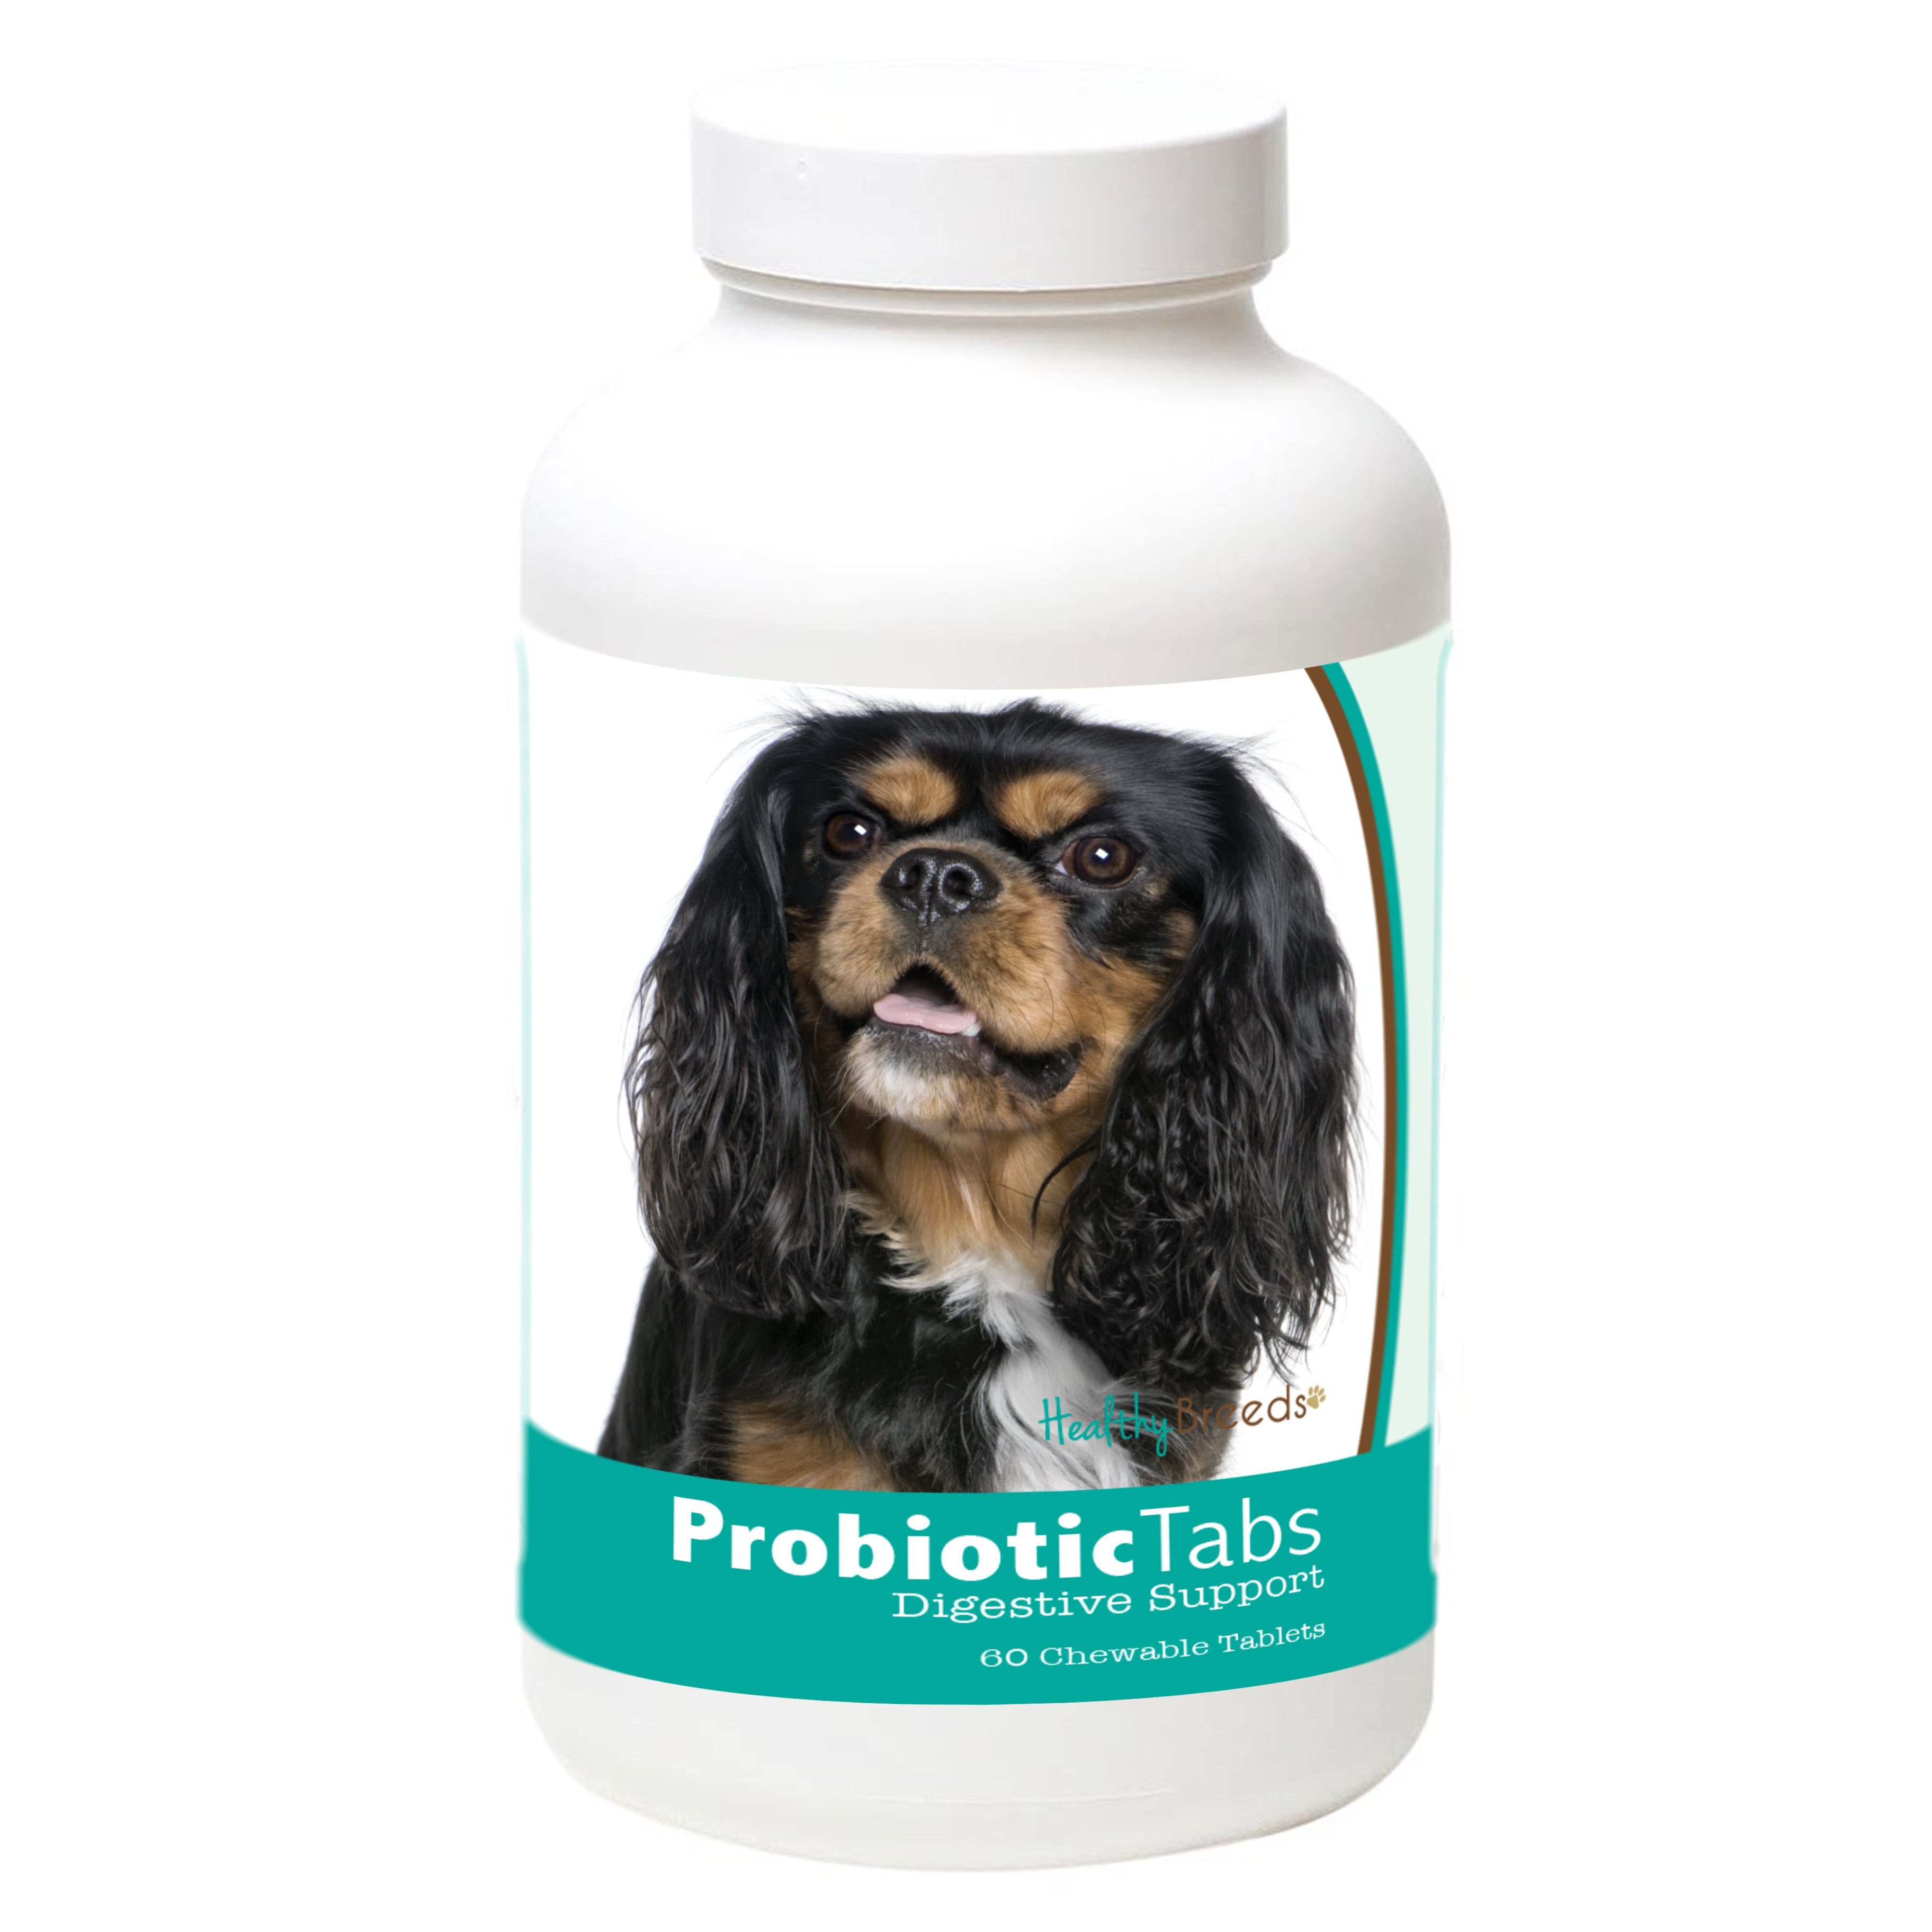 Cavalier King Charles Spaniel Probiotic and Digestive Support for Dogs 60 Count